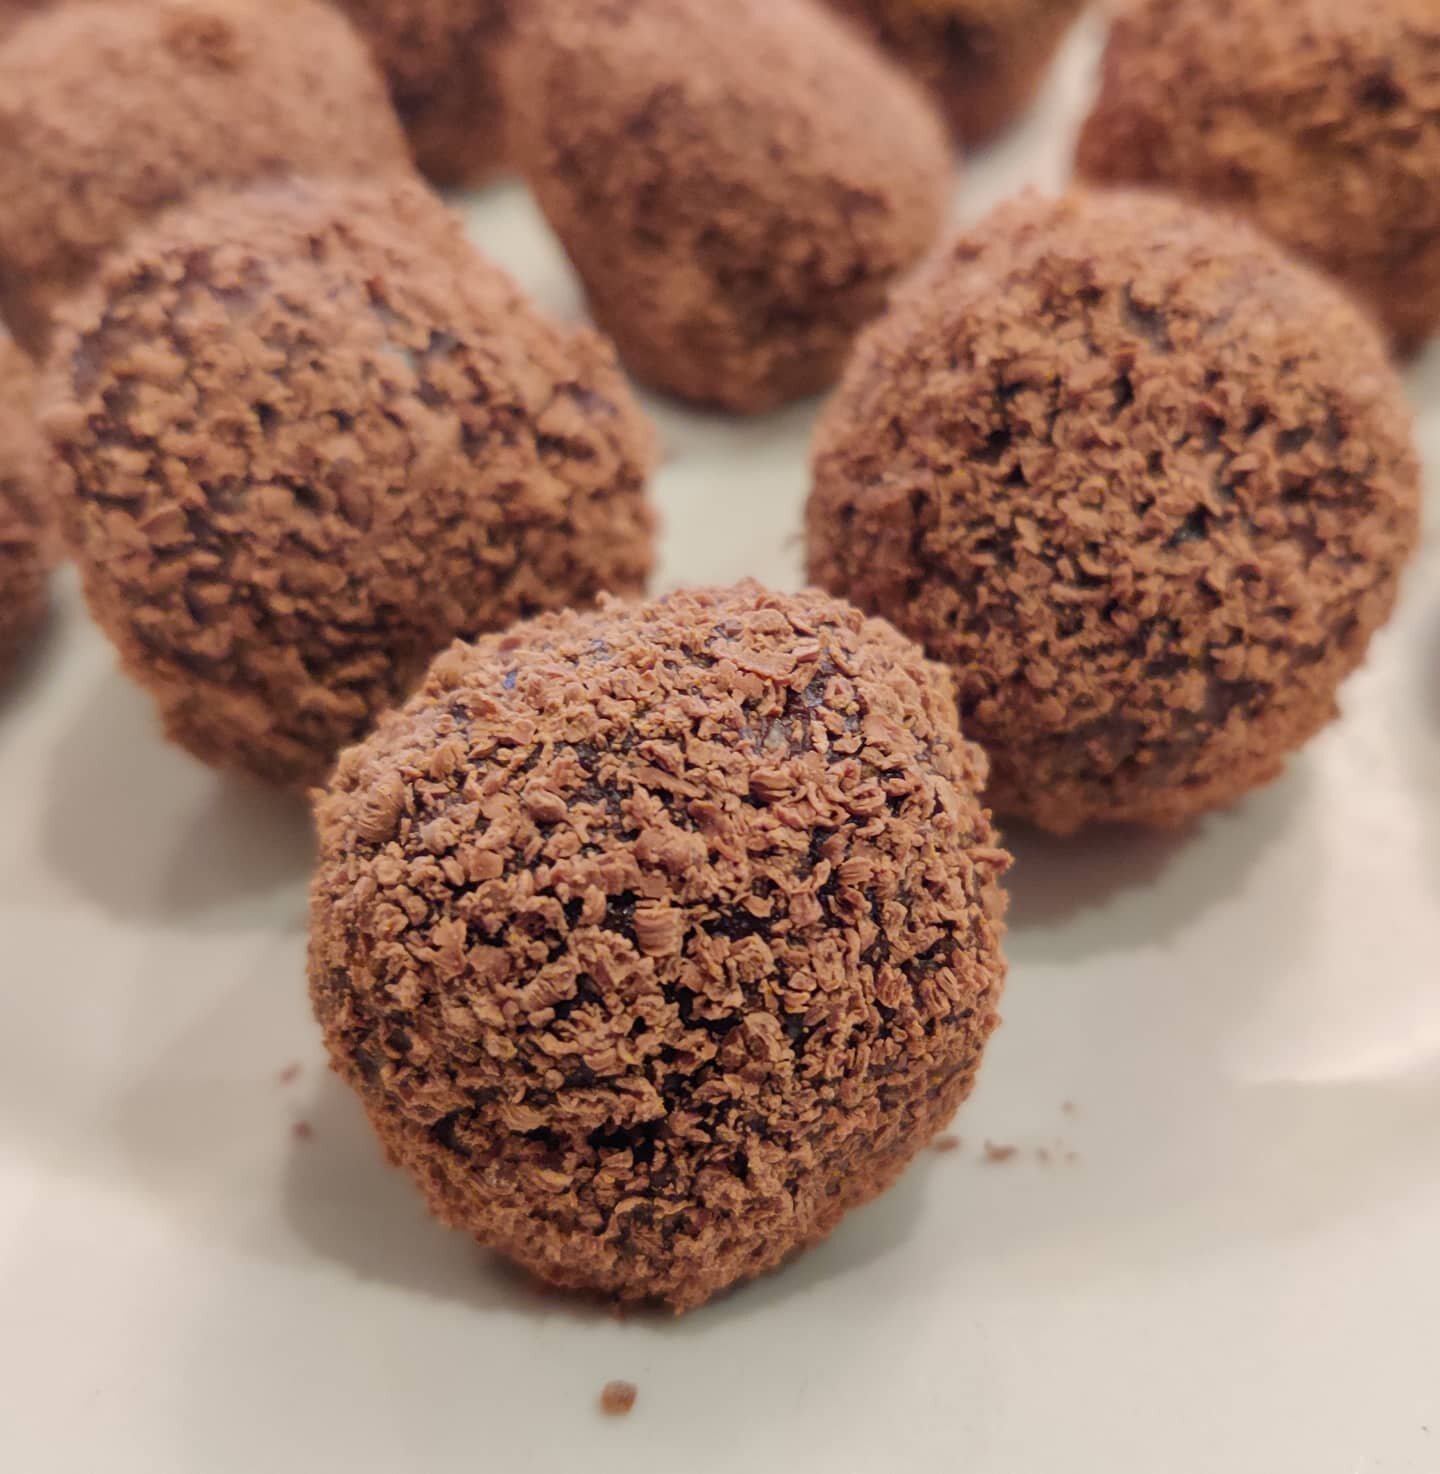 Delicious sweet treat made from dates, oats, Brazil nuts and #yoursuper magic mushroom powder. Perfect for rainy evenings but you're going to get messy hands making them!! 
#nomnomnom #chocolateballs #snack #tasty #glutenfree #dairyfree